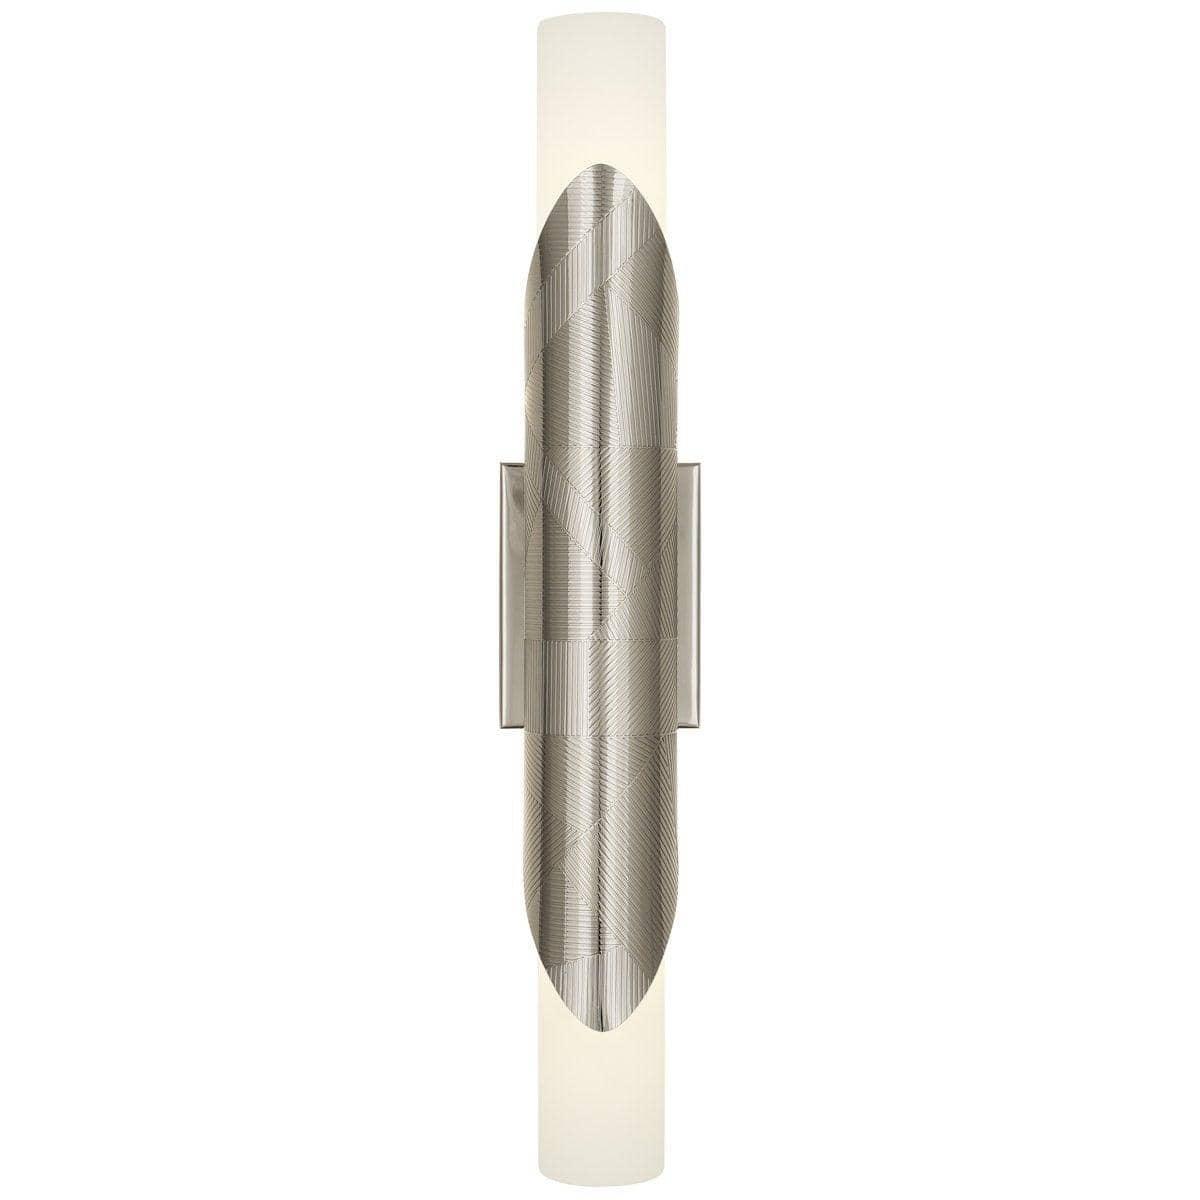 Robert Abbey - Brut Double Wall Sconce - S621 | Montreal Lighting & Hardware